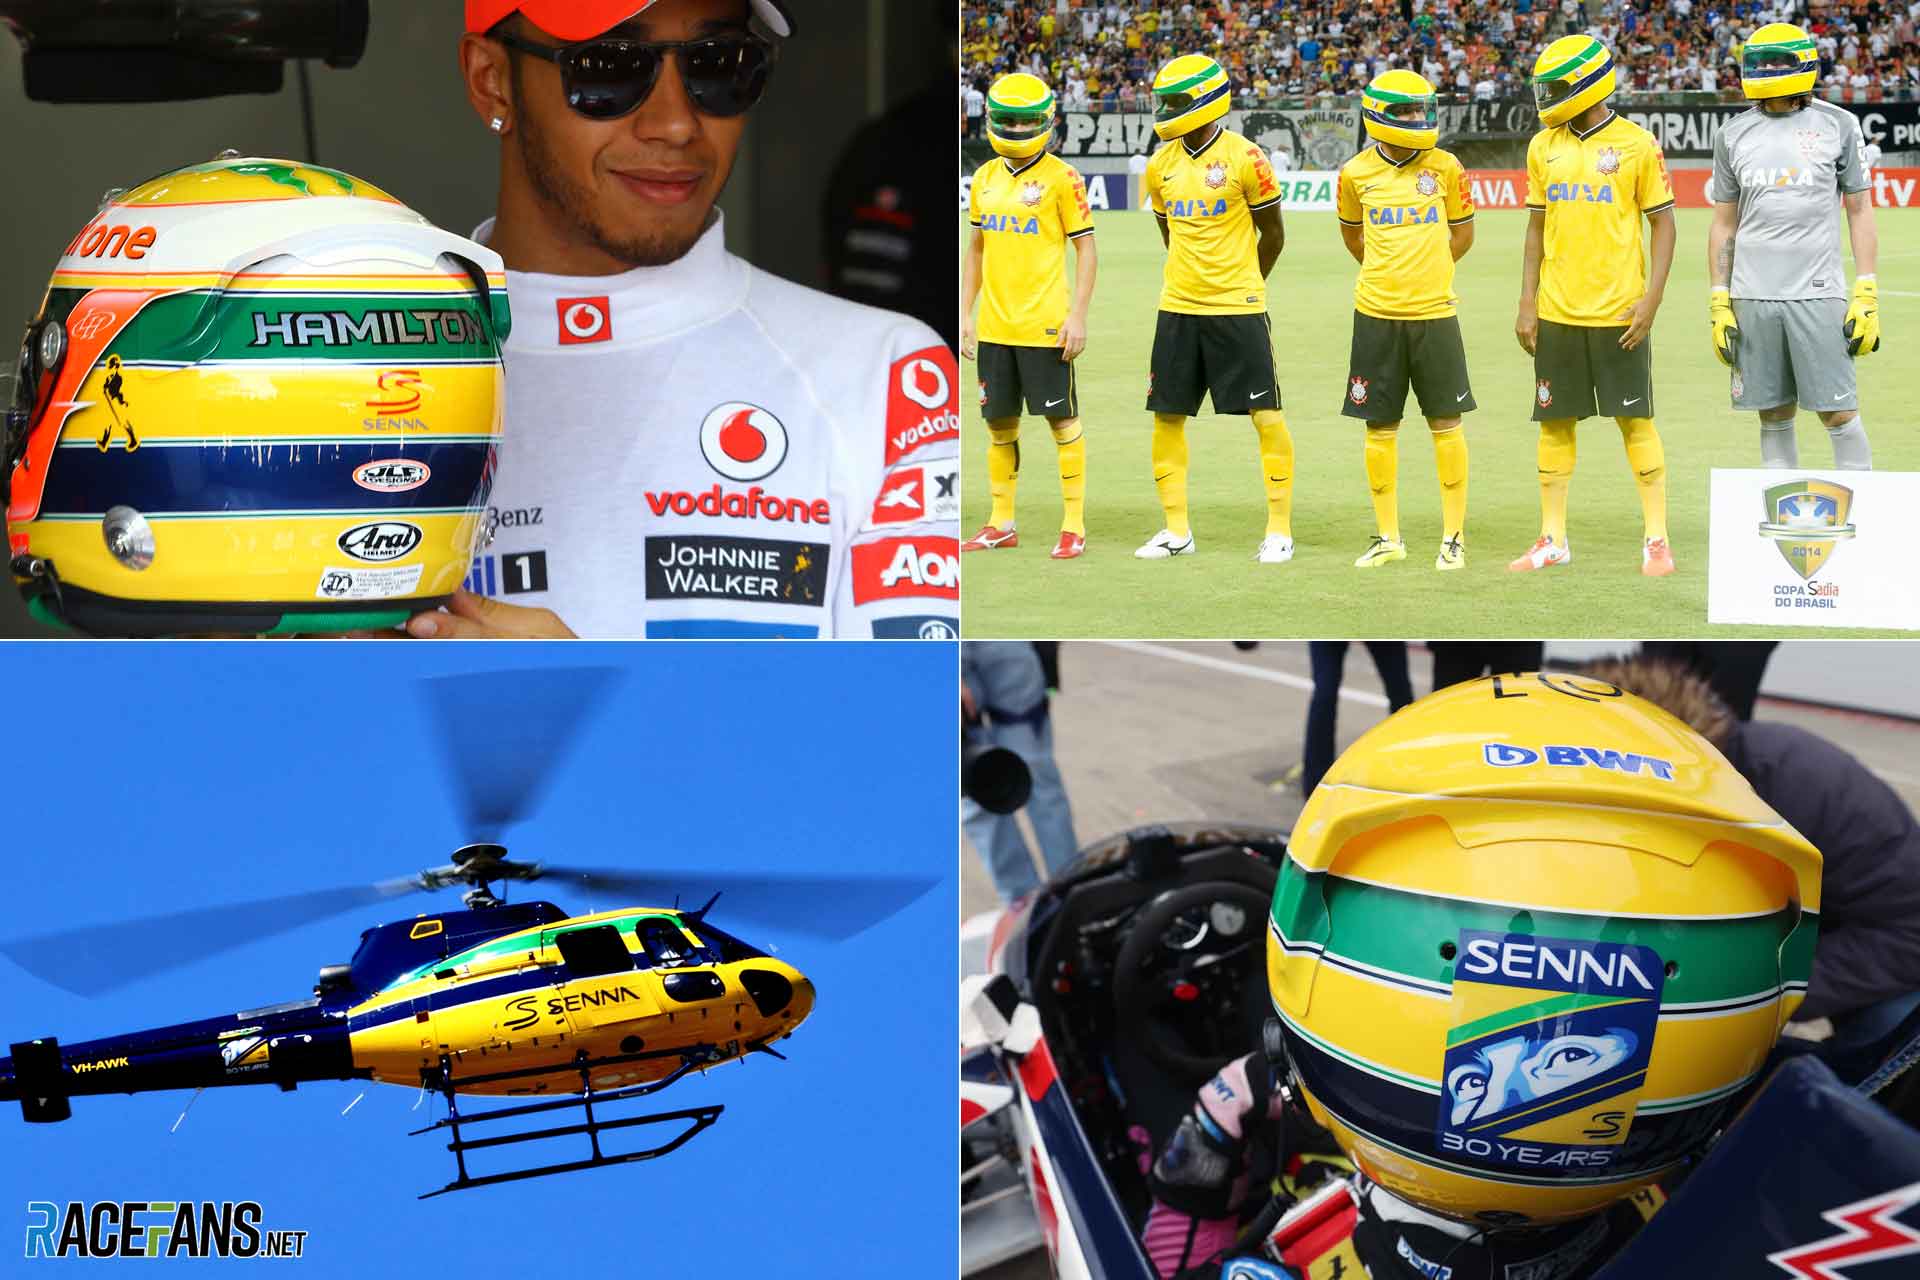 Ayrton Senna's helmet design being carried by Lewis Hamilton, Pierre Gasly, Corinthians football team and a helicopter